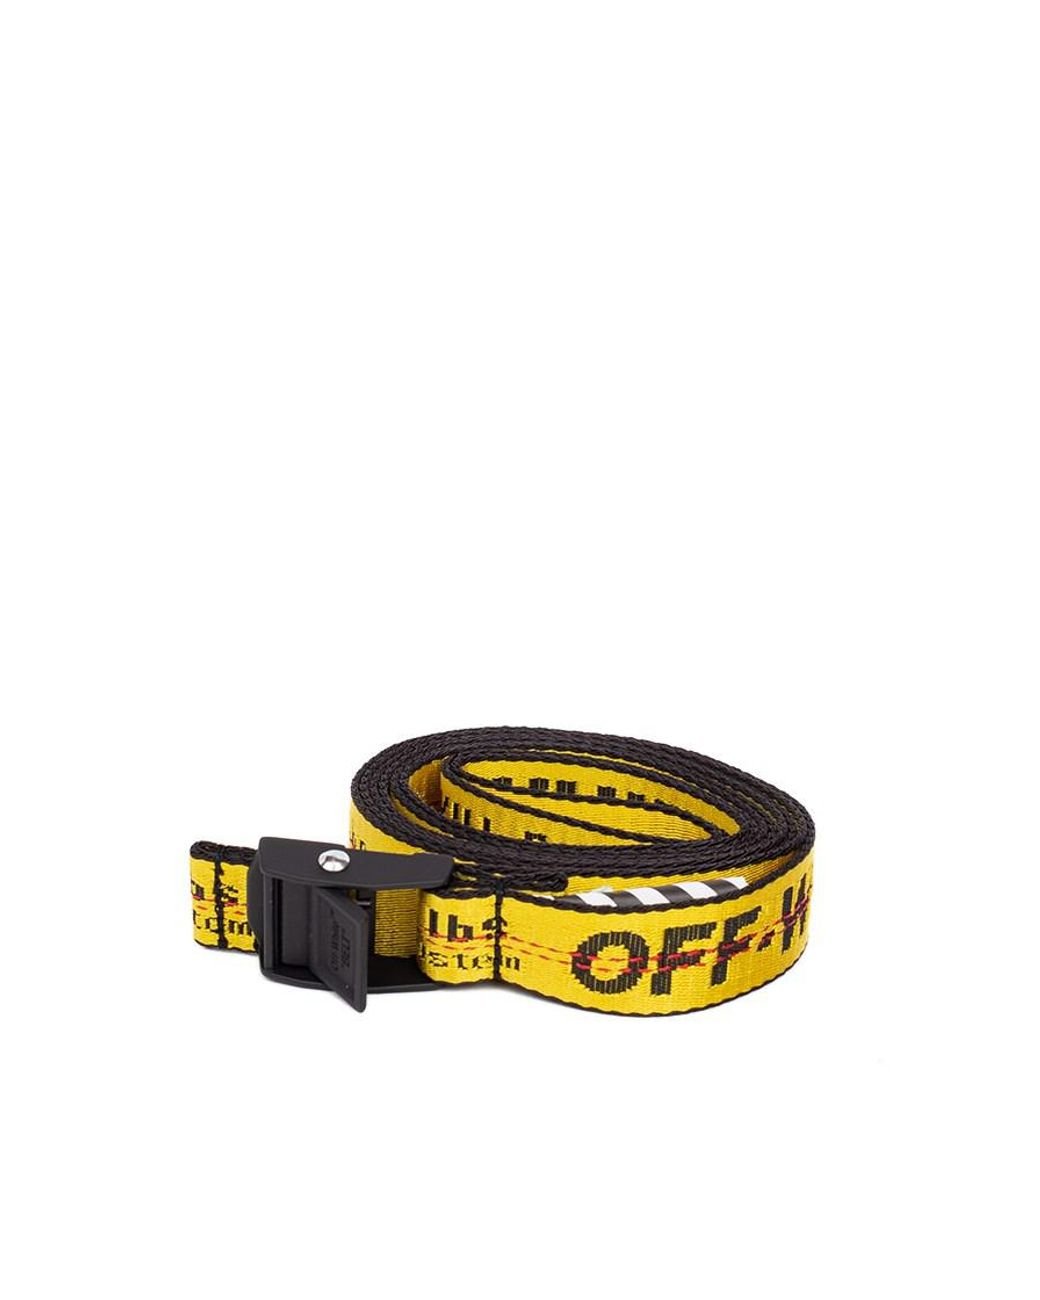 VIRGIL ABLOH OFF WHITE Industrial Belt YELLOW & BLACK BRAND NEW WITH  TAGS 80"